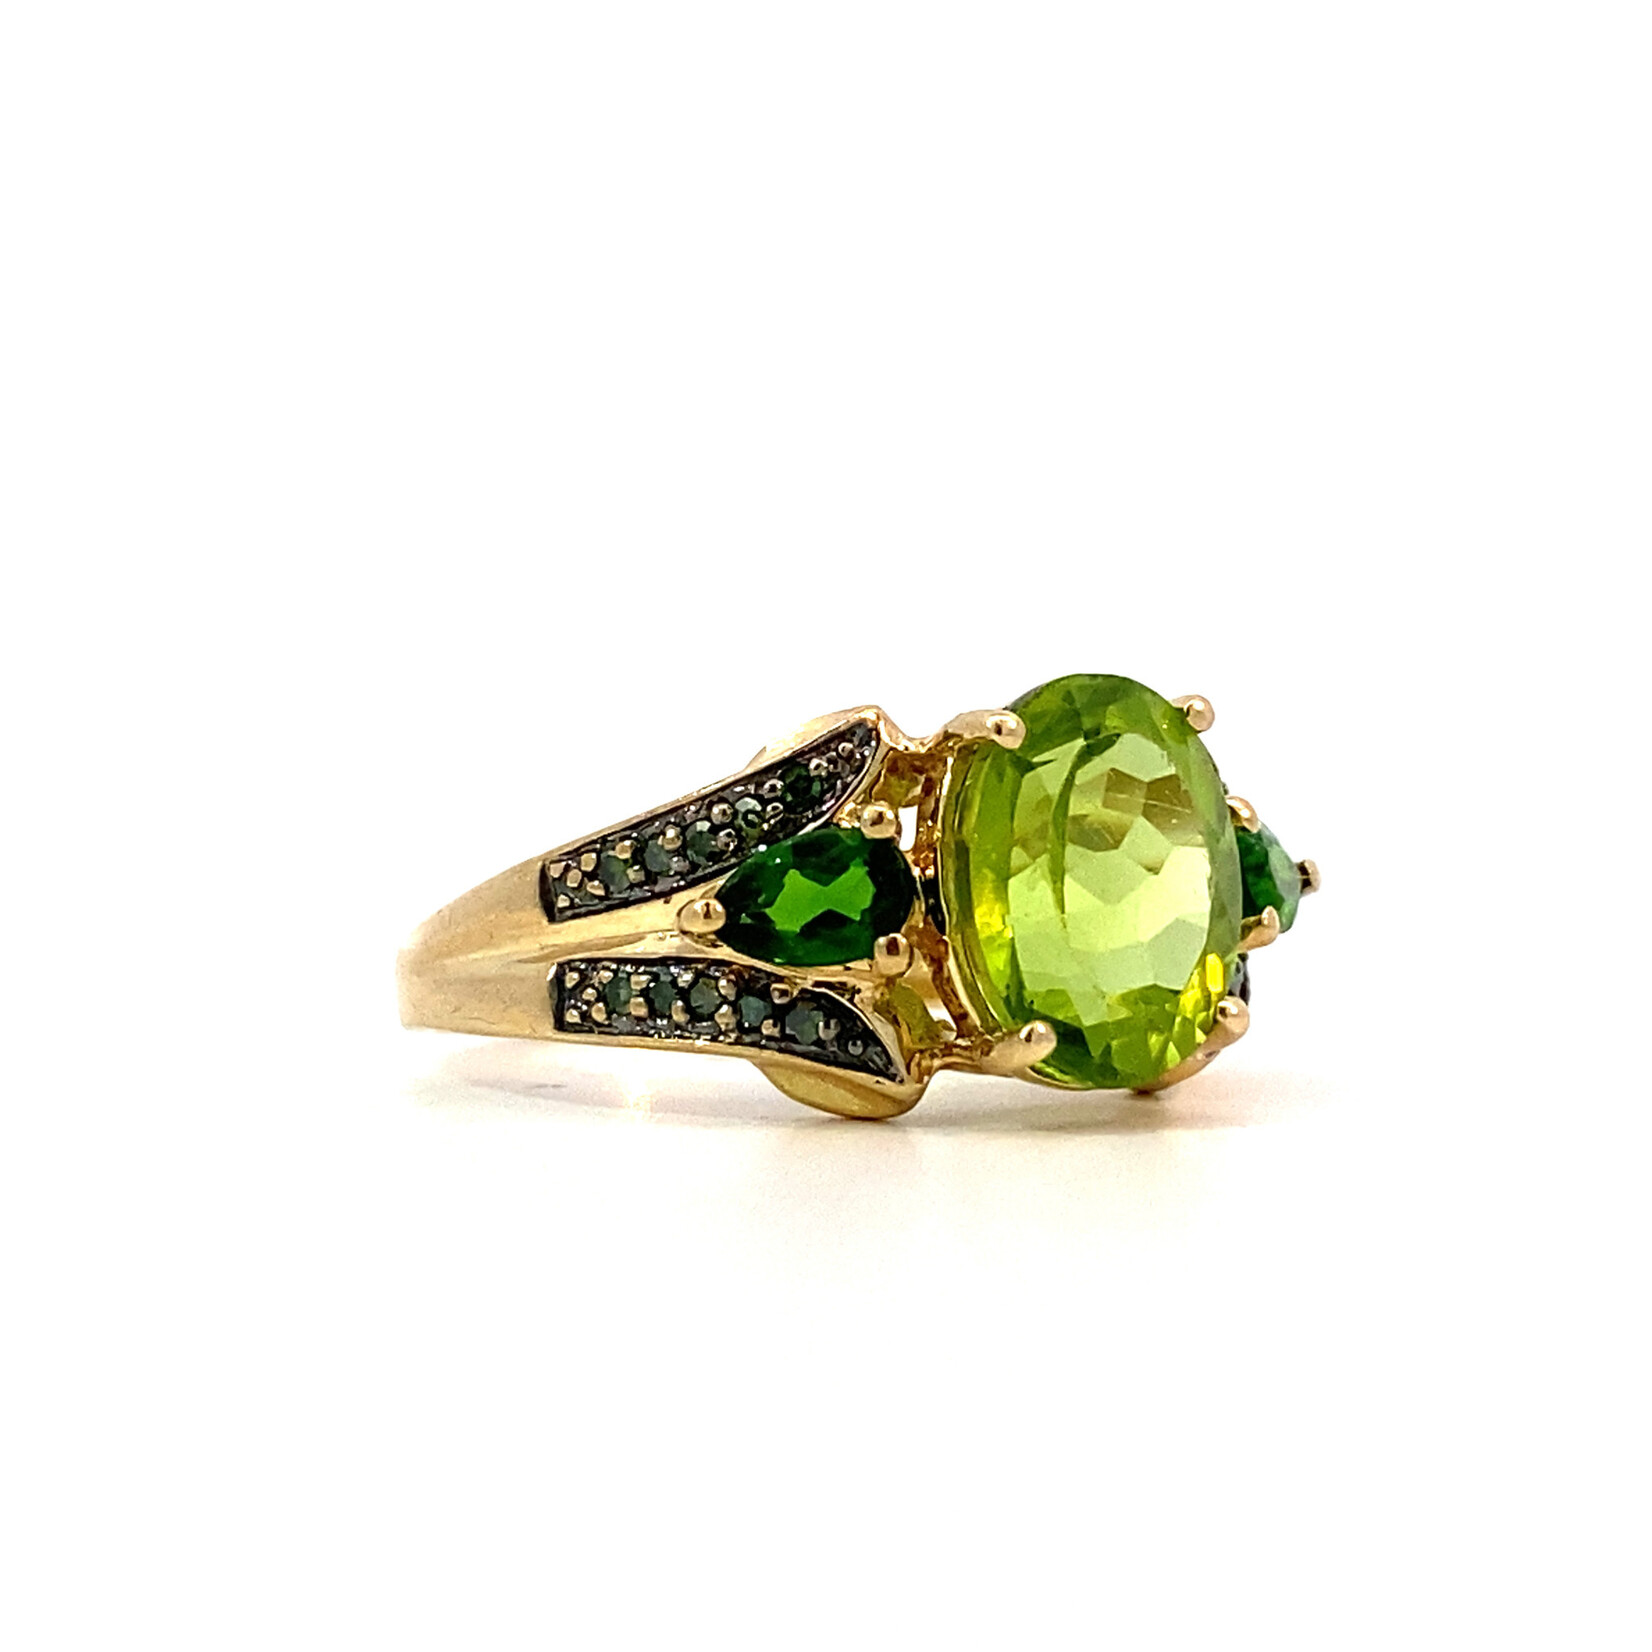 10K Yellow Gold Peridot, Chrome Diopside ring size 7.75